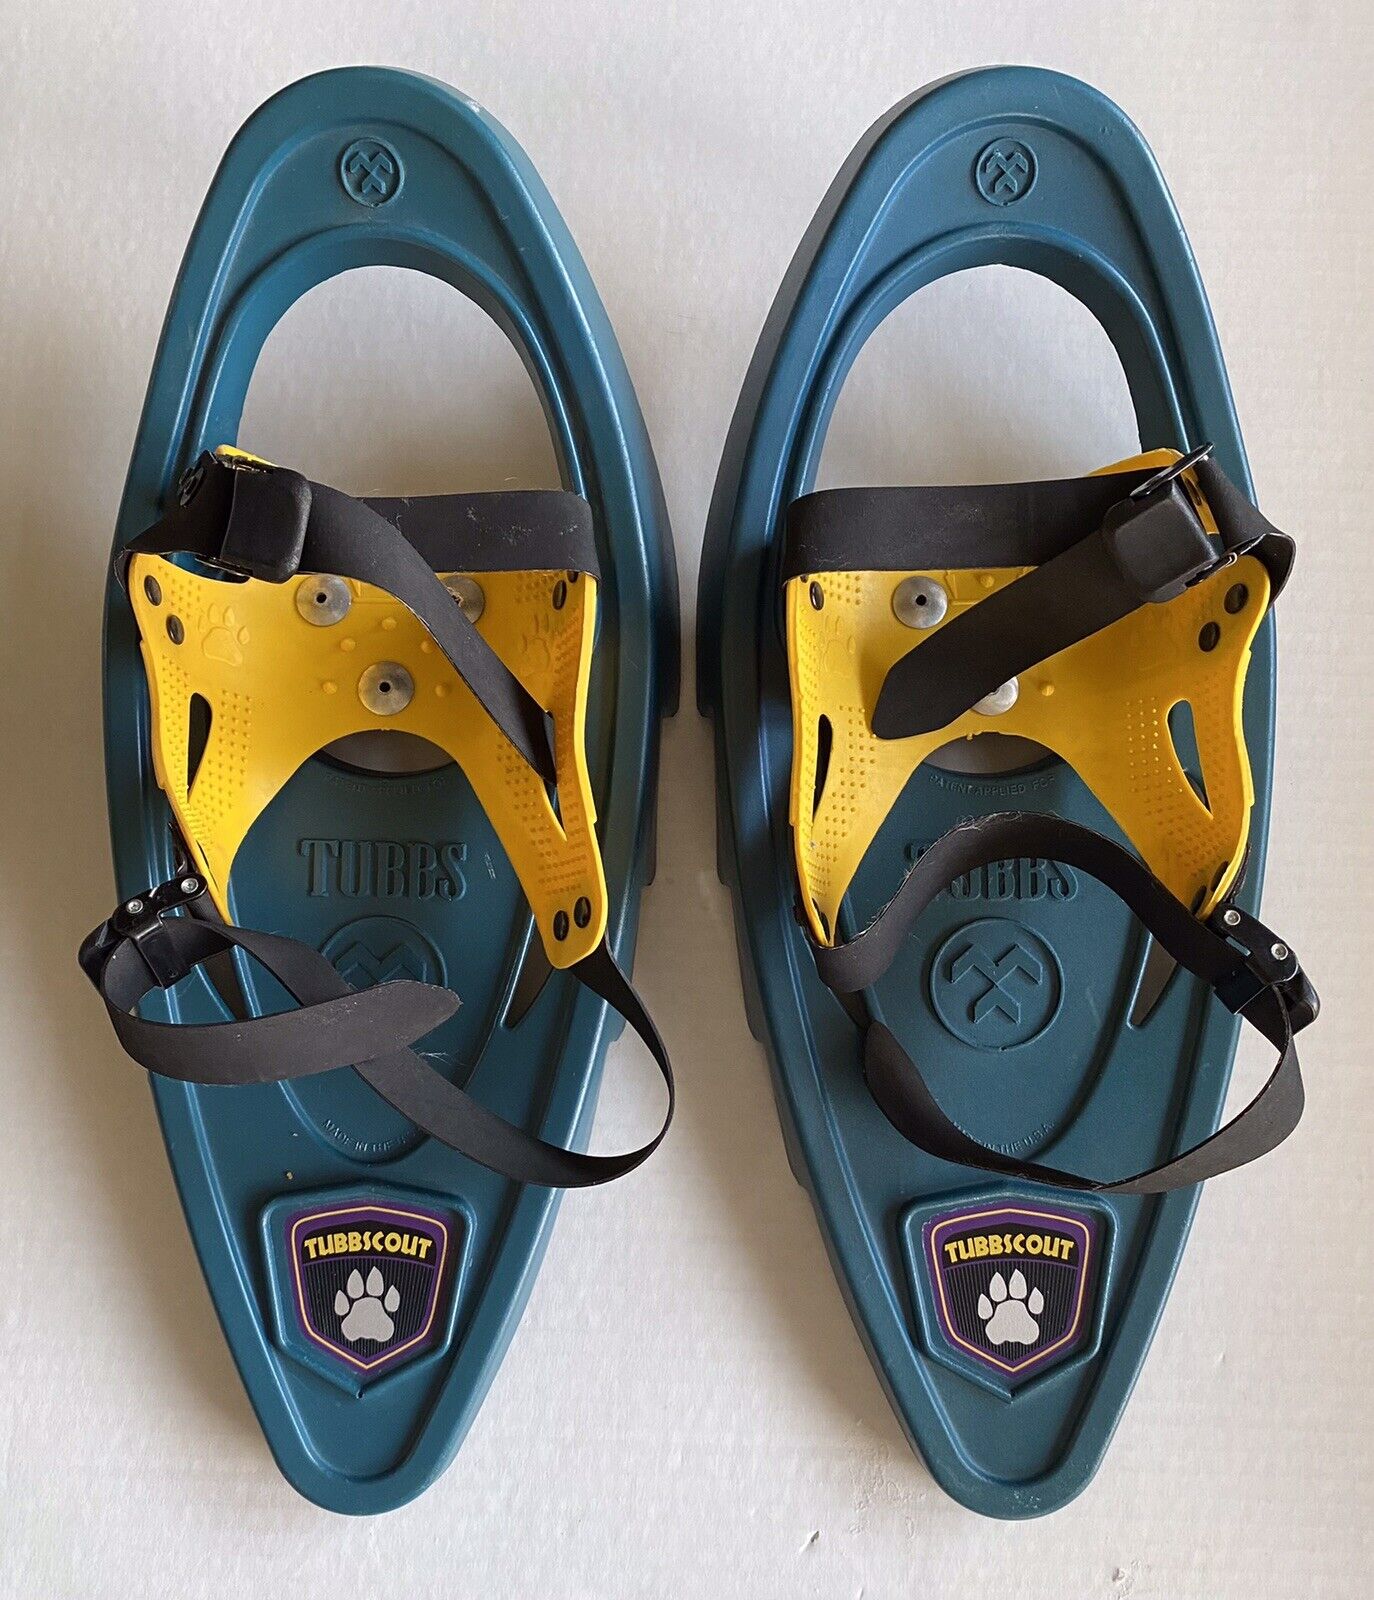 Tubbs Tubbscout Kid's Snowshoes 7" X 15” Winter Ice